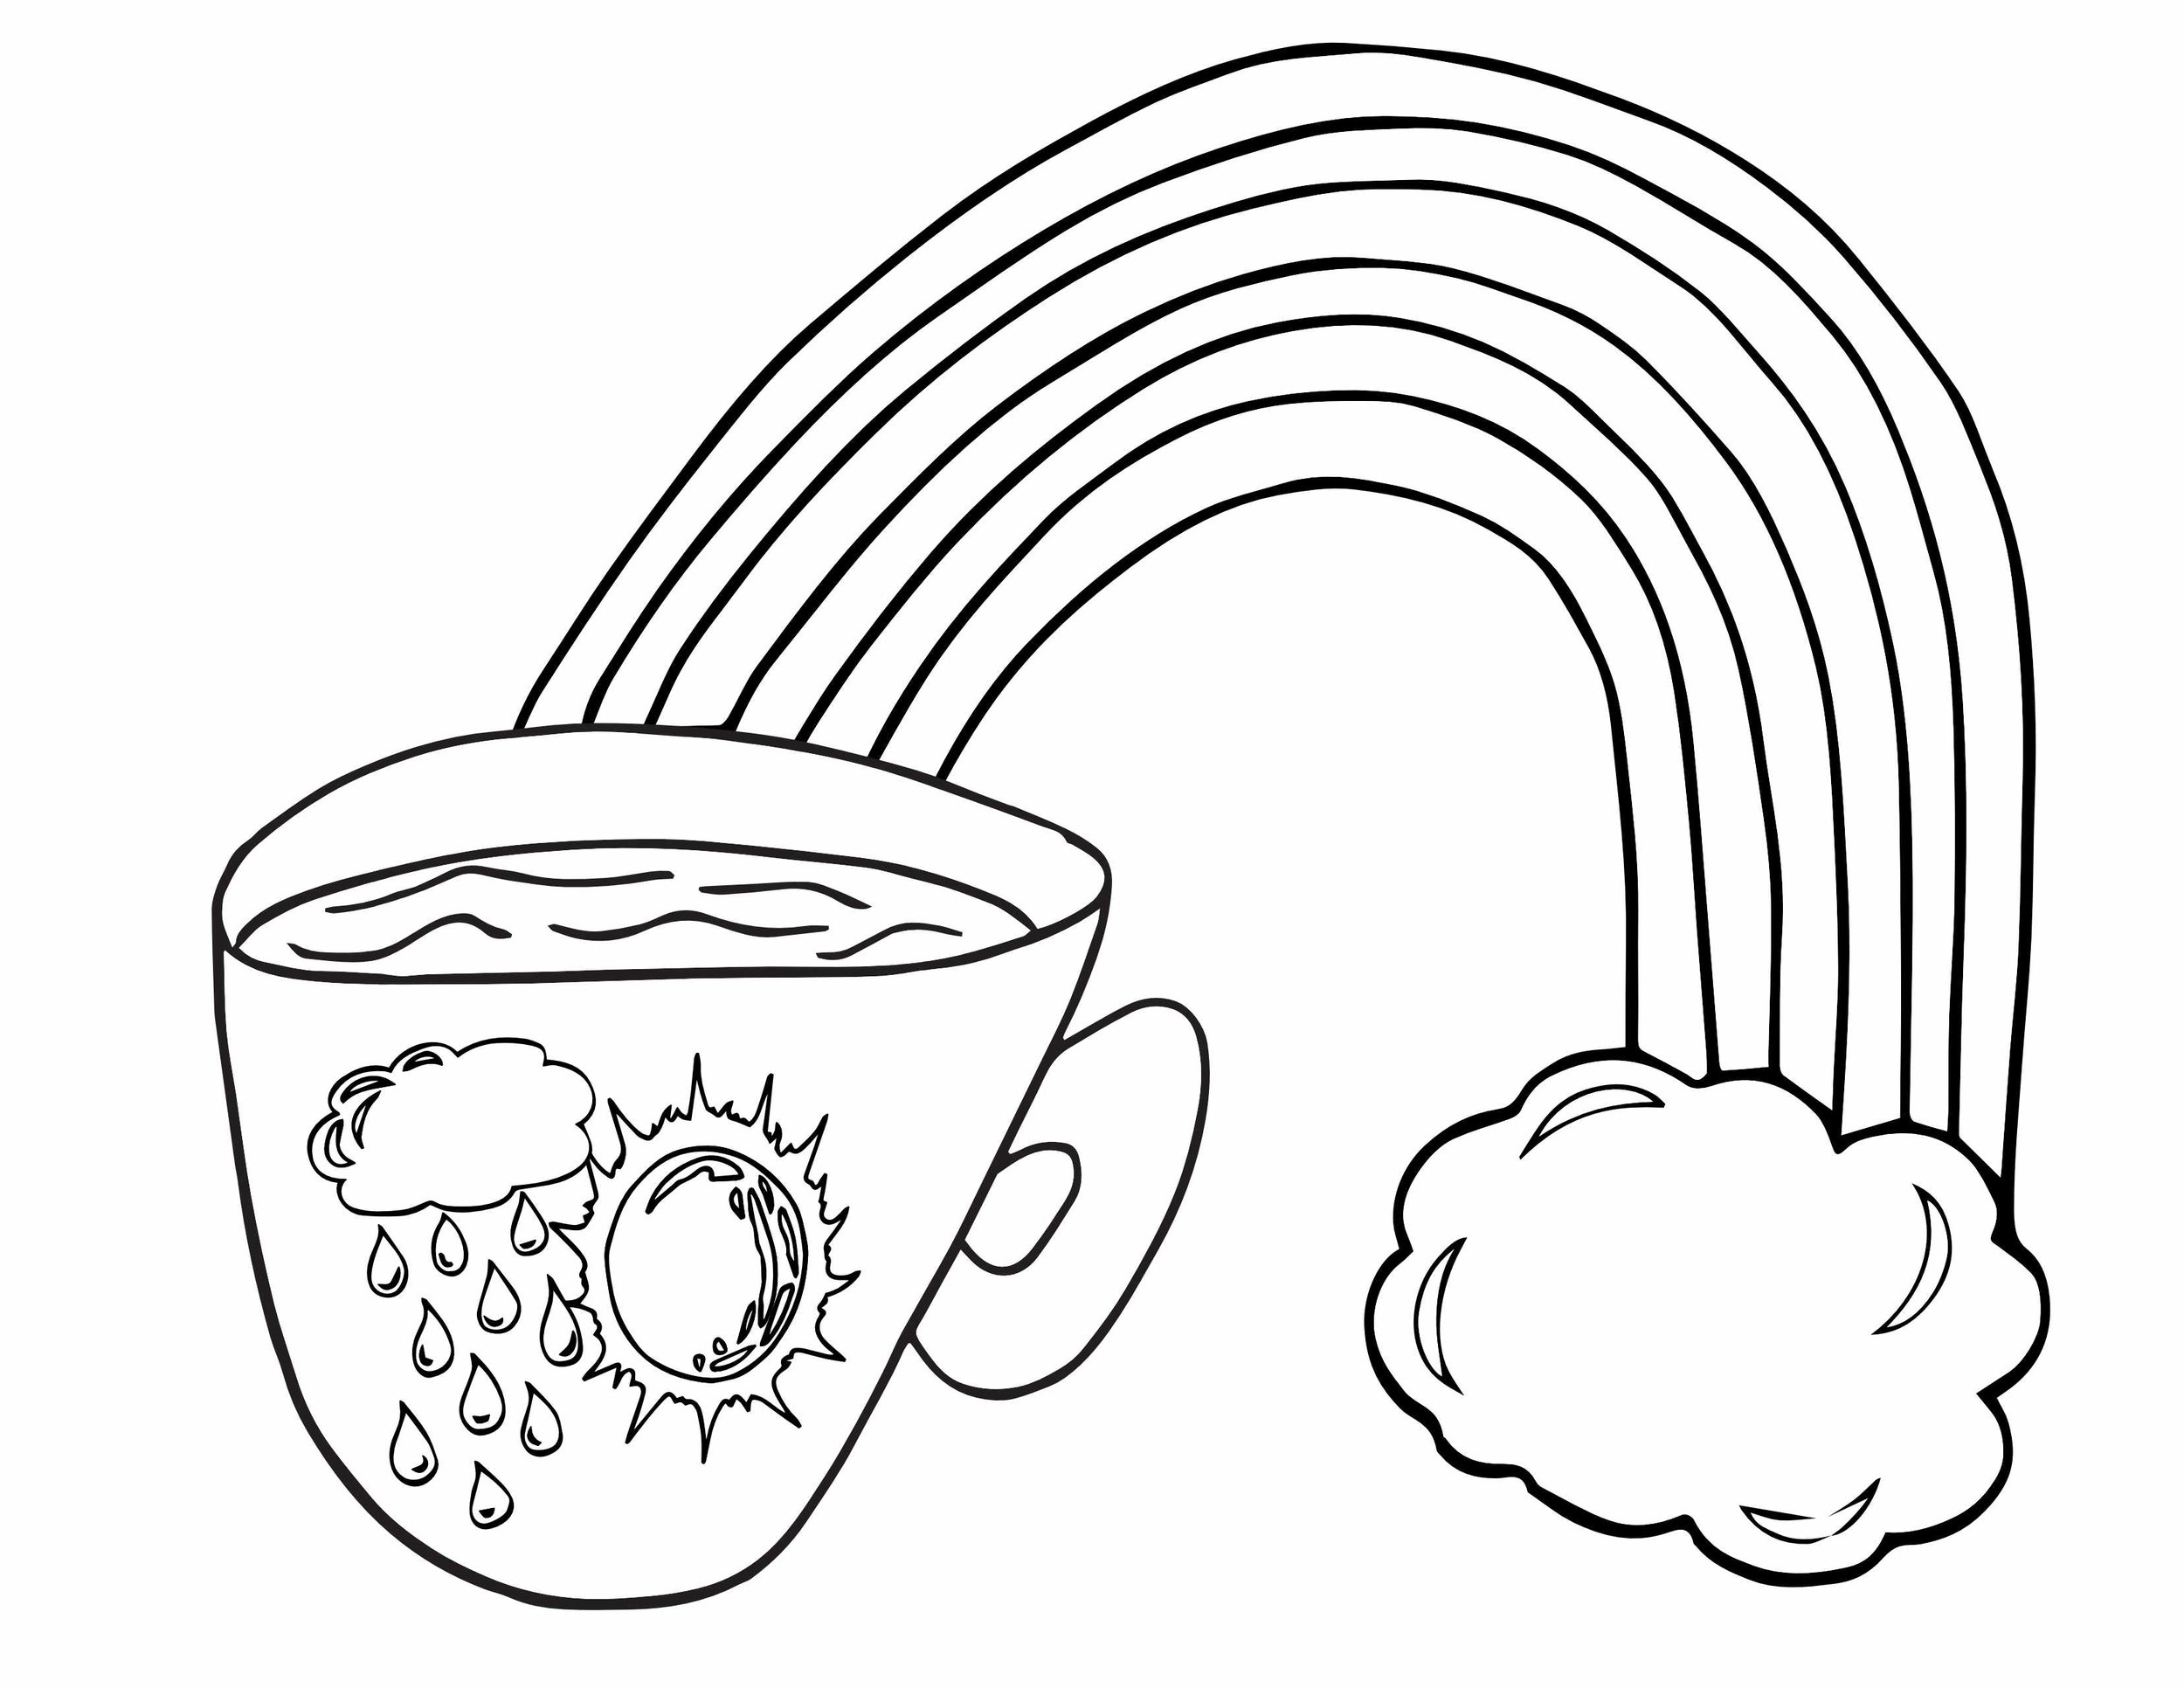 Free coffee coloring pages â stevie doodles